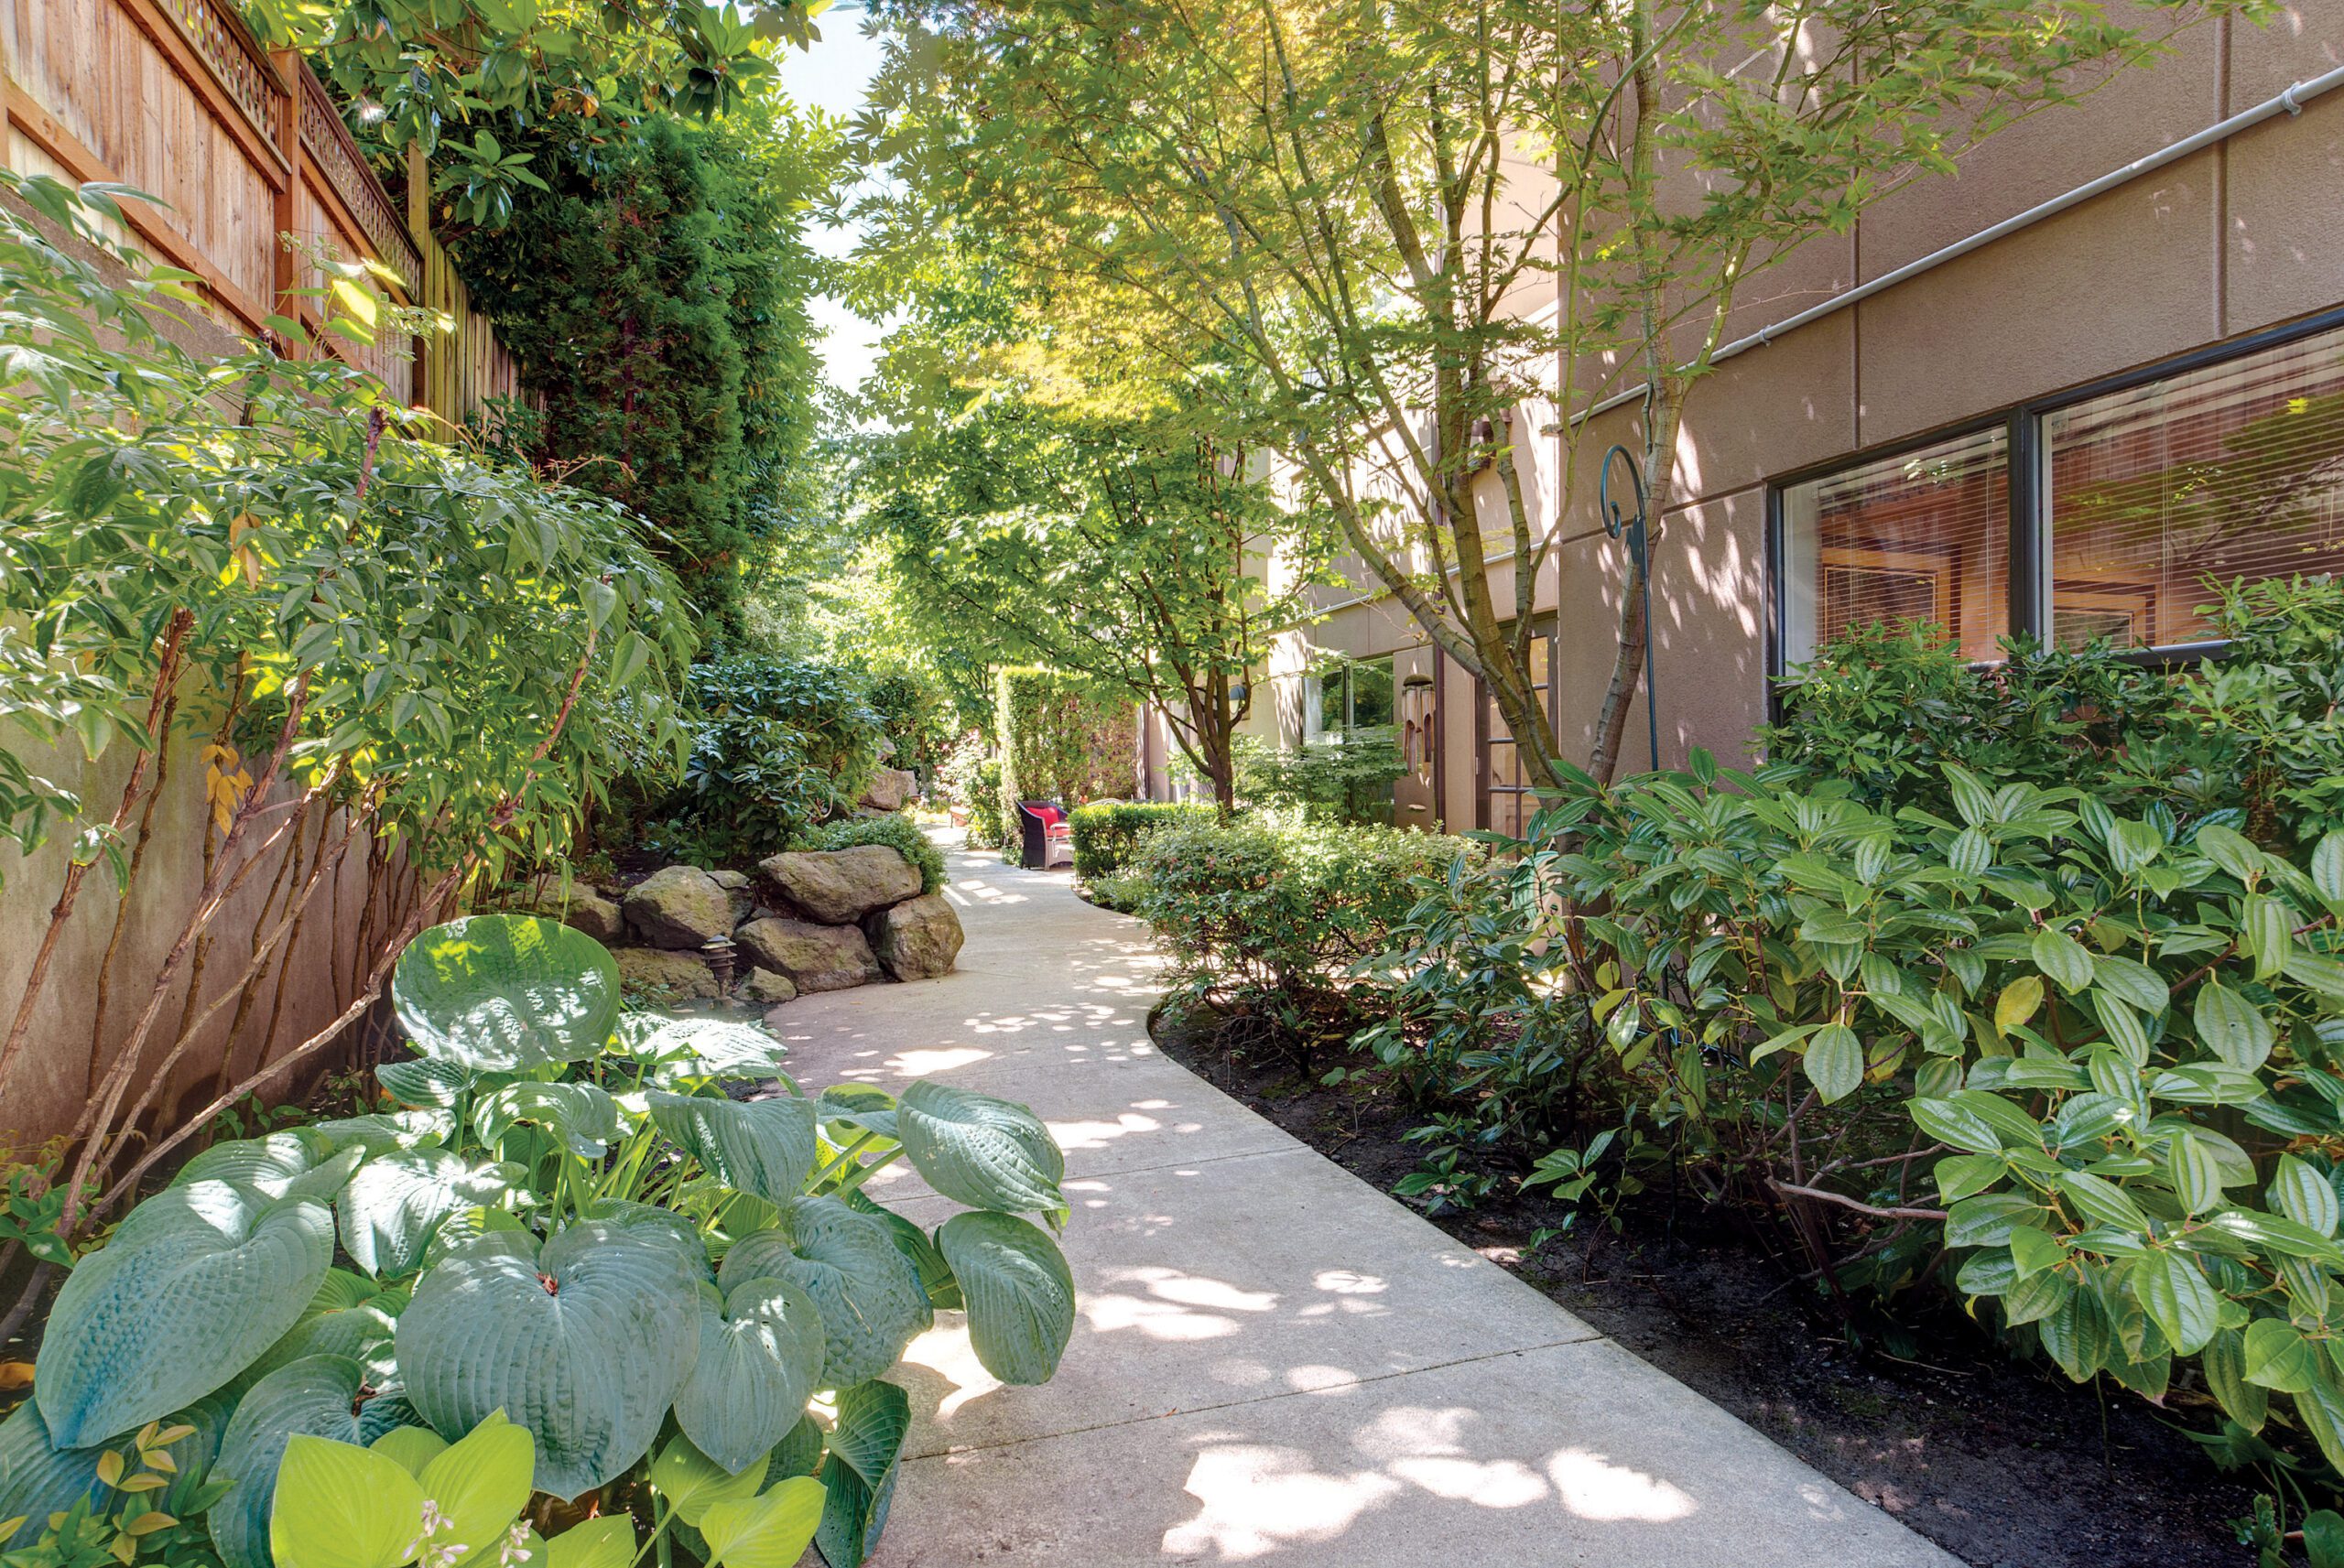 A serene residential walkway adorned with lush plants and trees, creating a tranquil atmosphere.